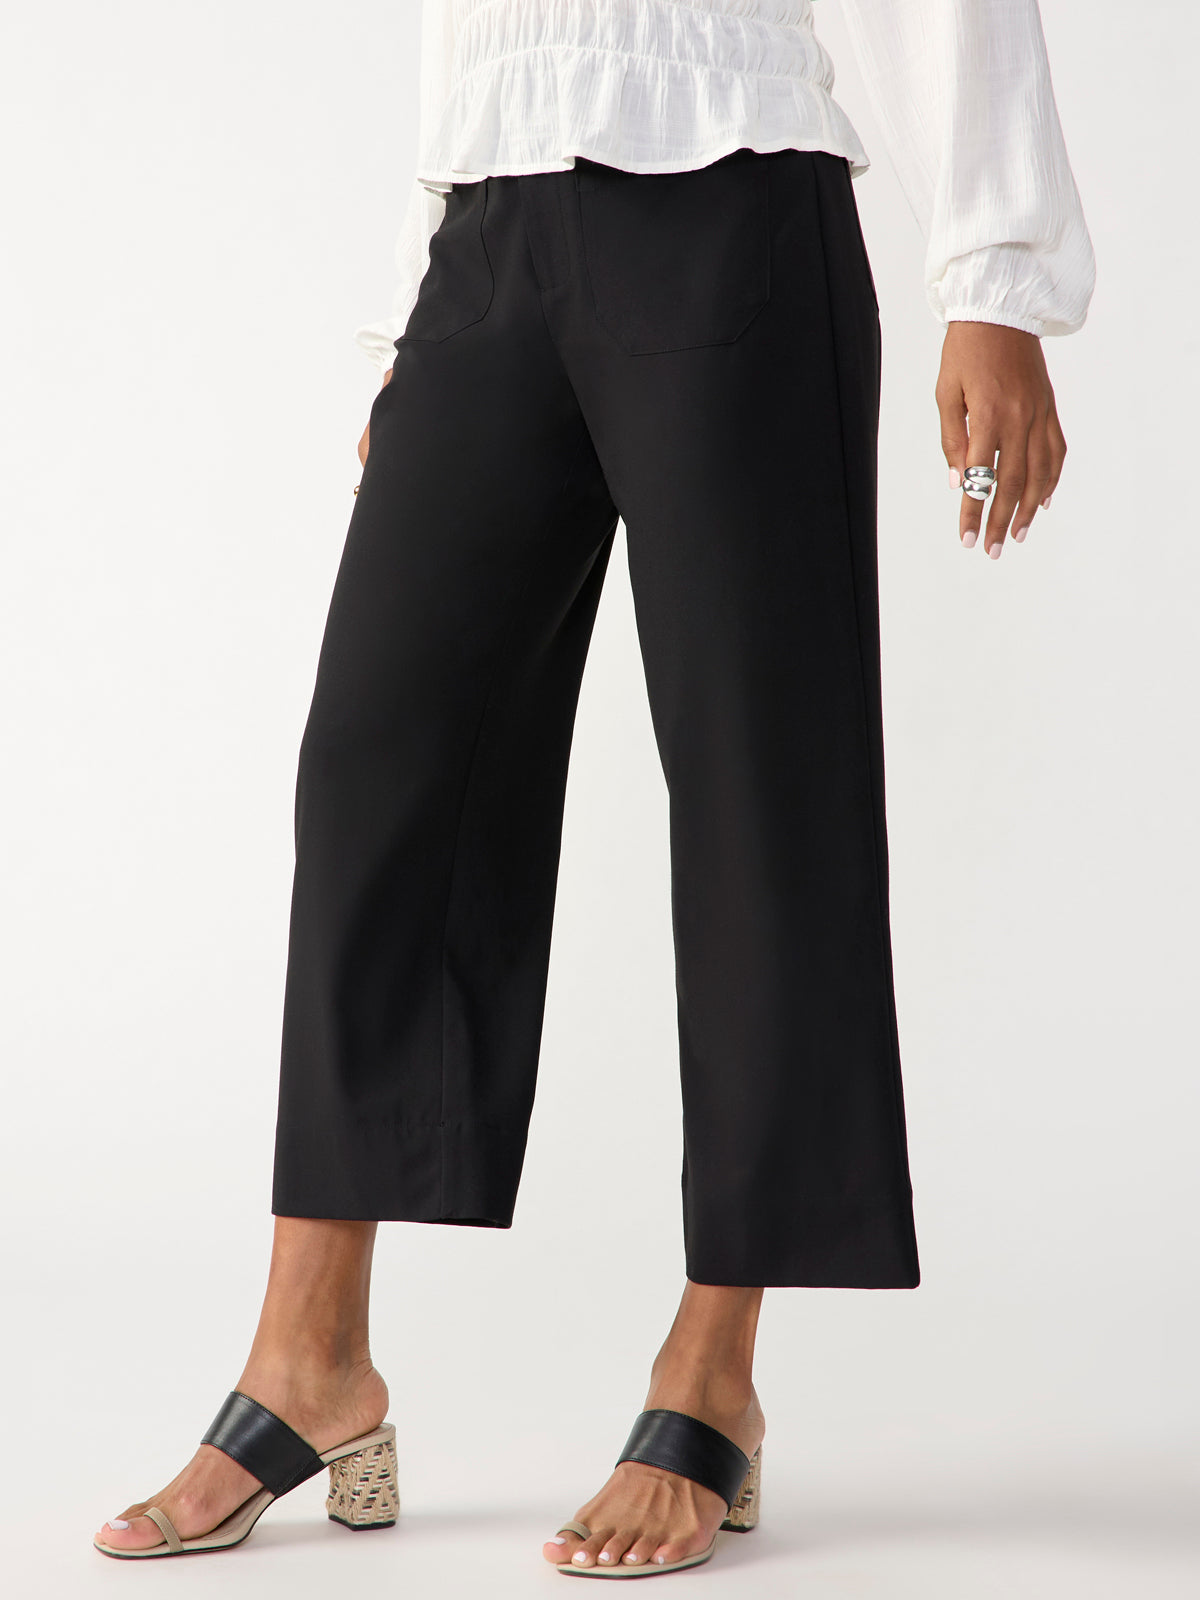 Buy Cropped Trousers Online | Next UK